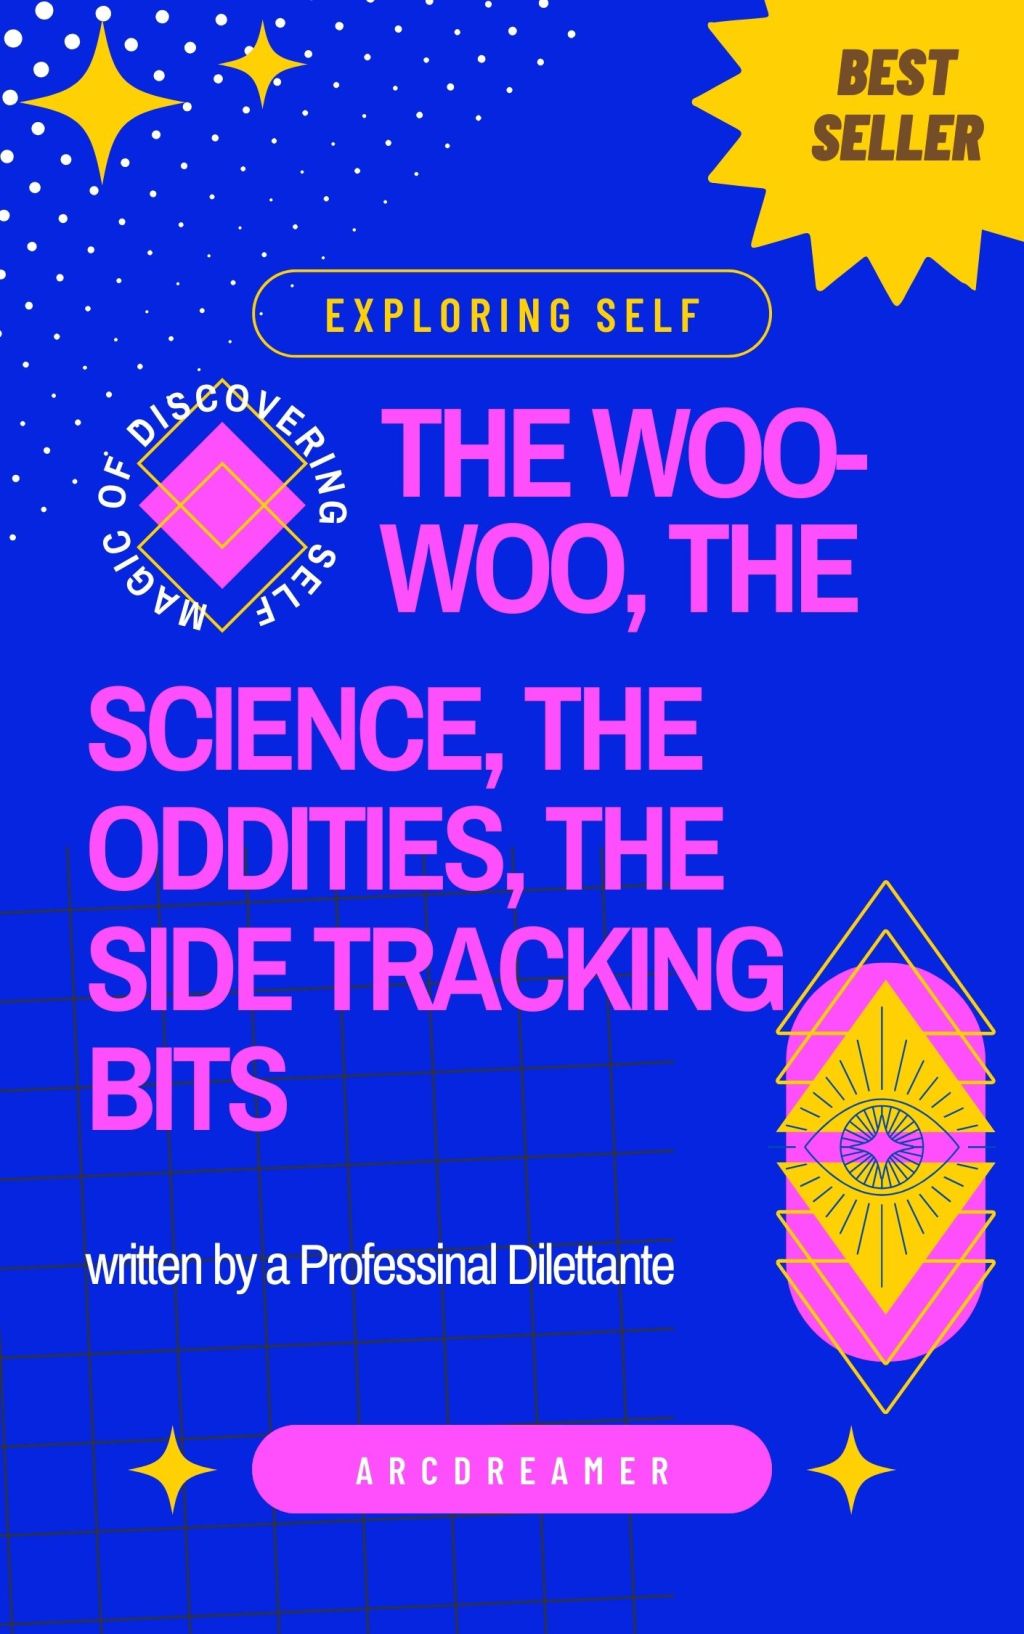 Exploring self: the woo-woo, the science, the oddities, the side tracking bits written by Professional Dilettante